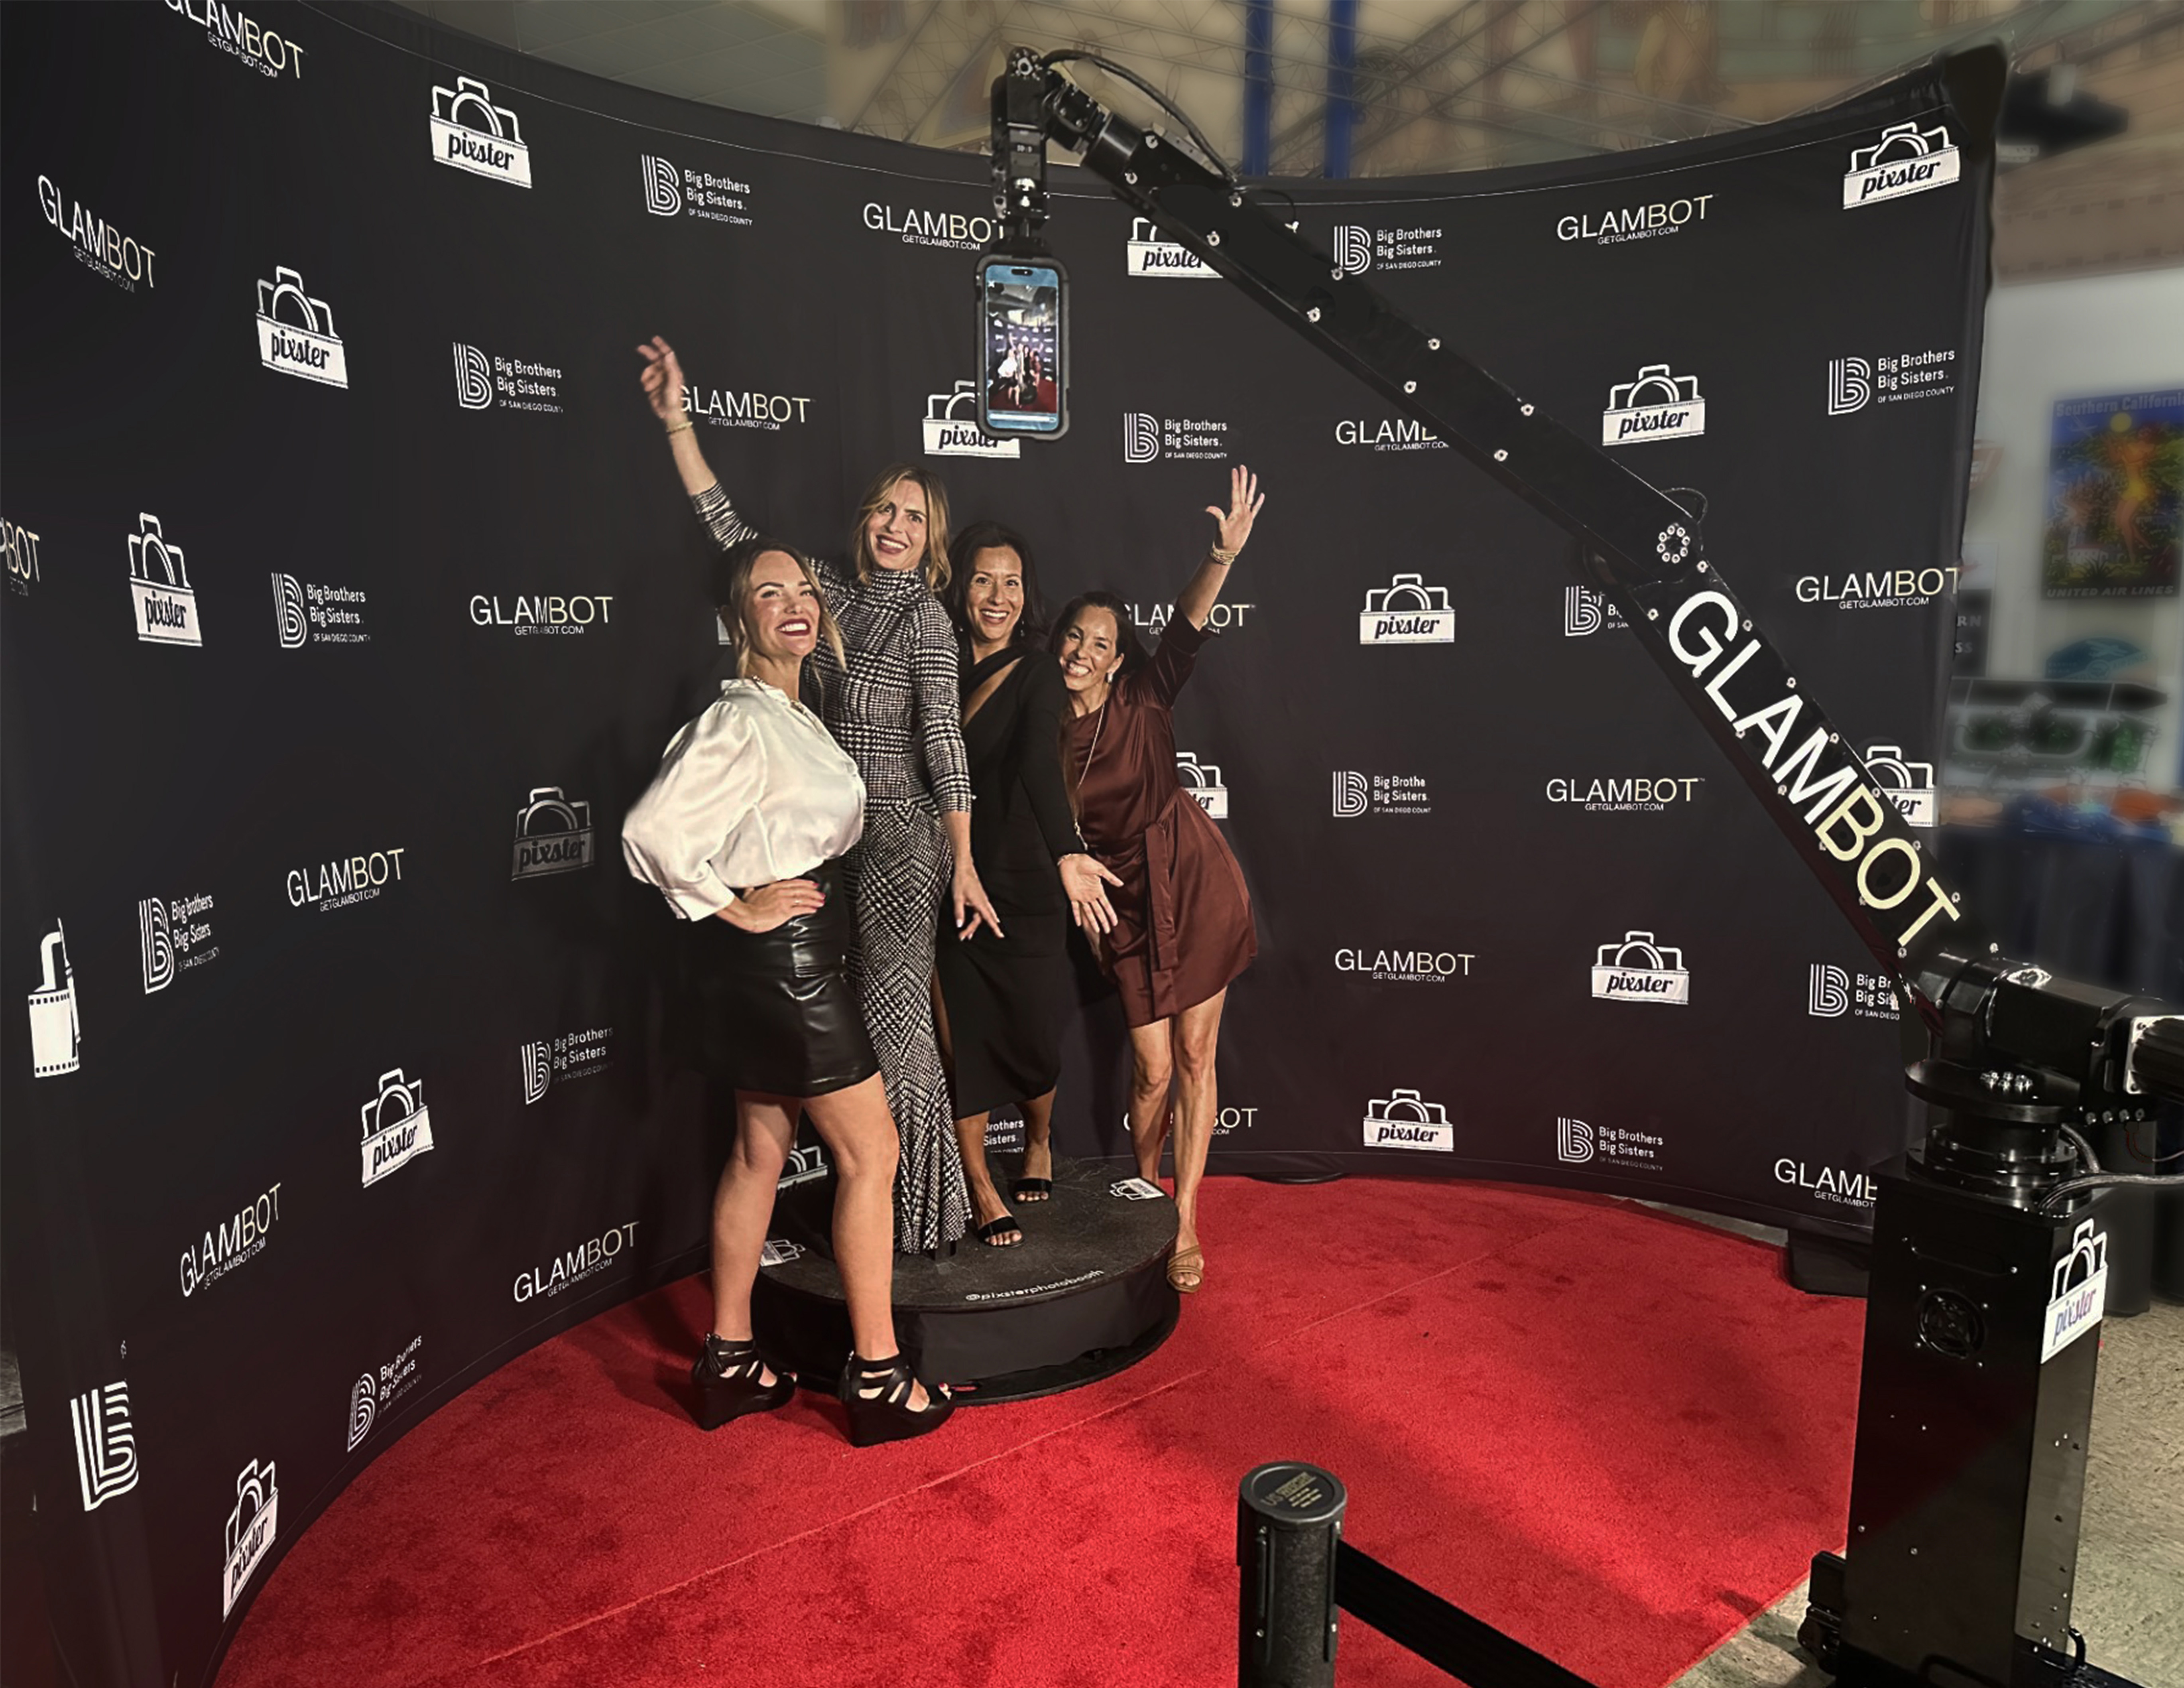 Glambot™, a Revolutionary Cinematic Robot Experience for Events, Announces Launch